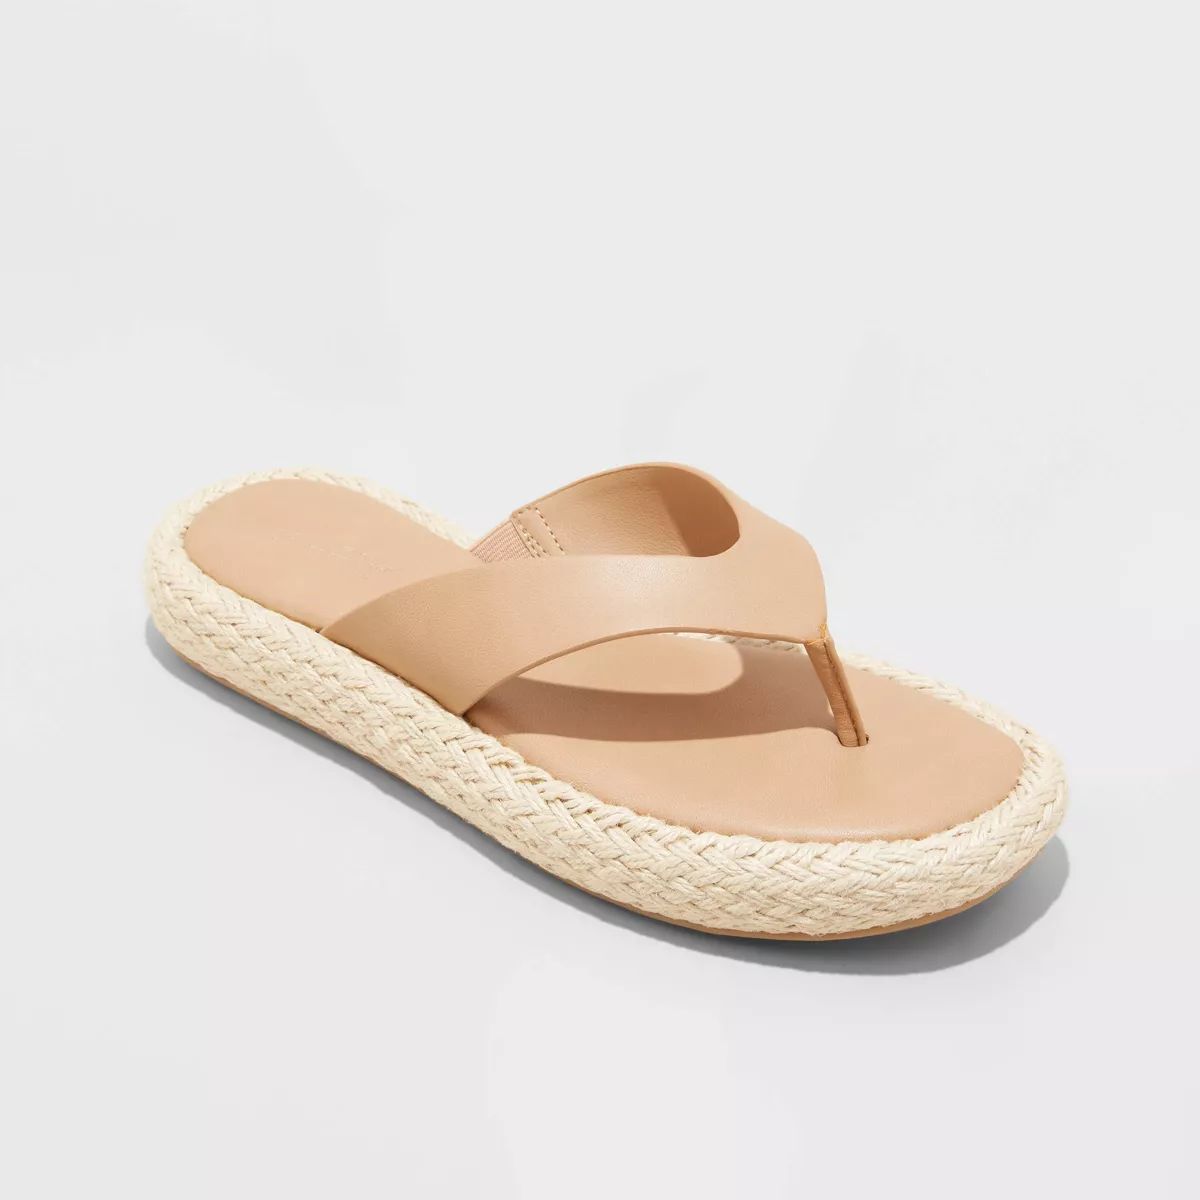 Women's Ginger Espadrille Sandals with Memory Foam Insole - Universal Thread™ Tan 7 | Target